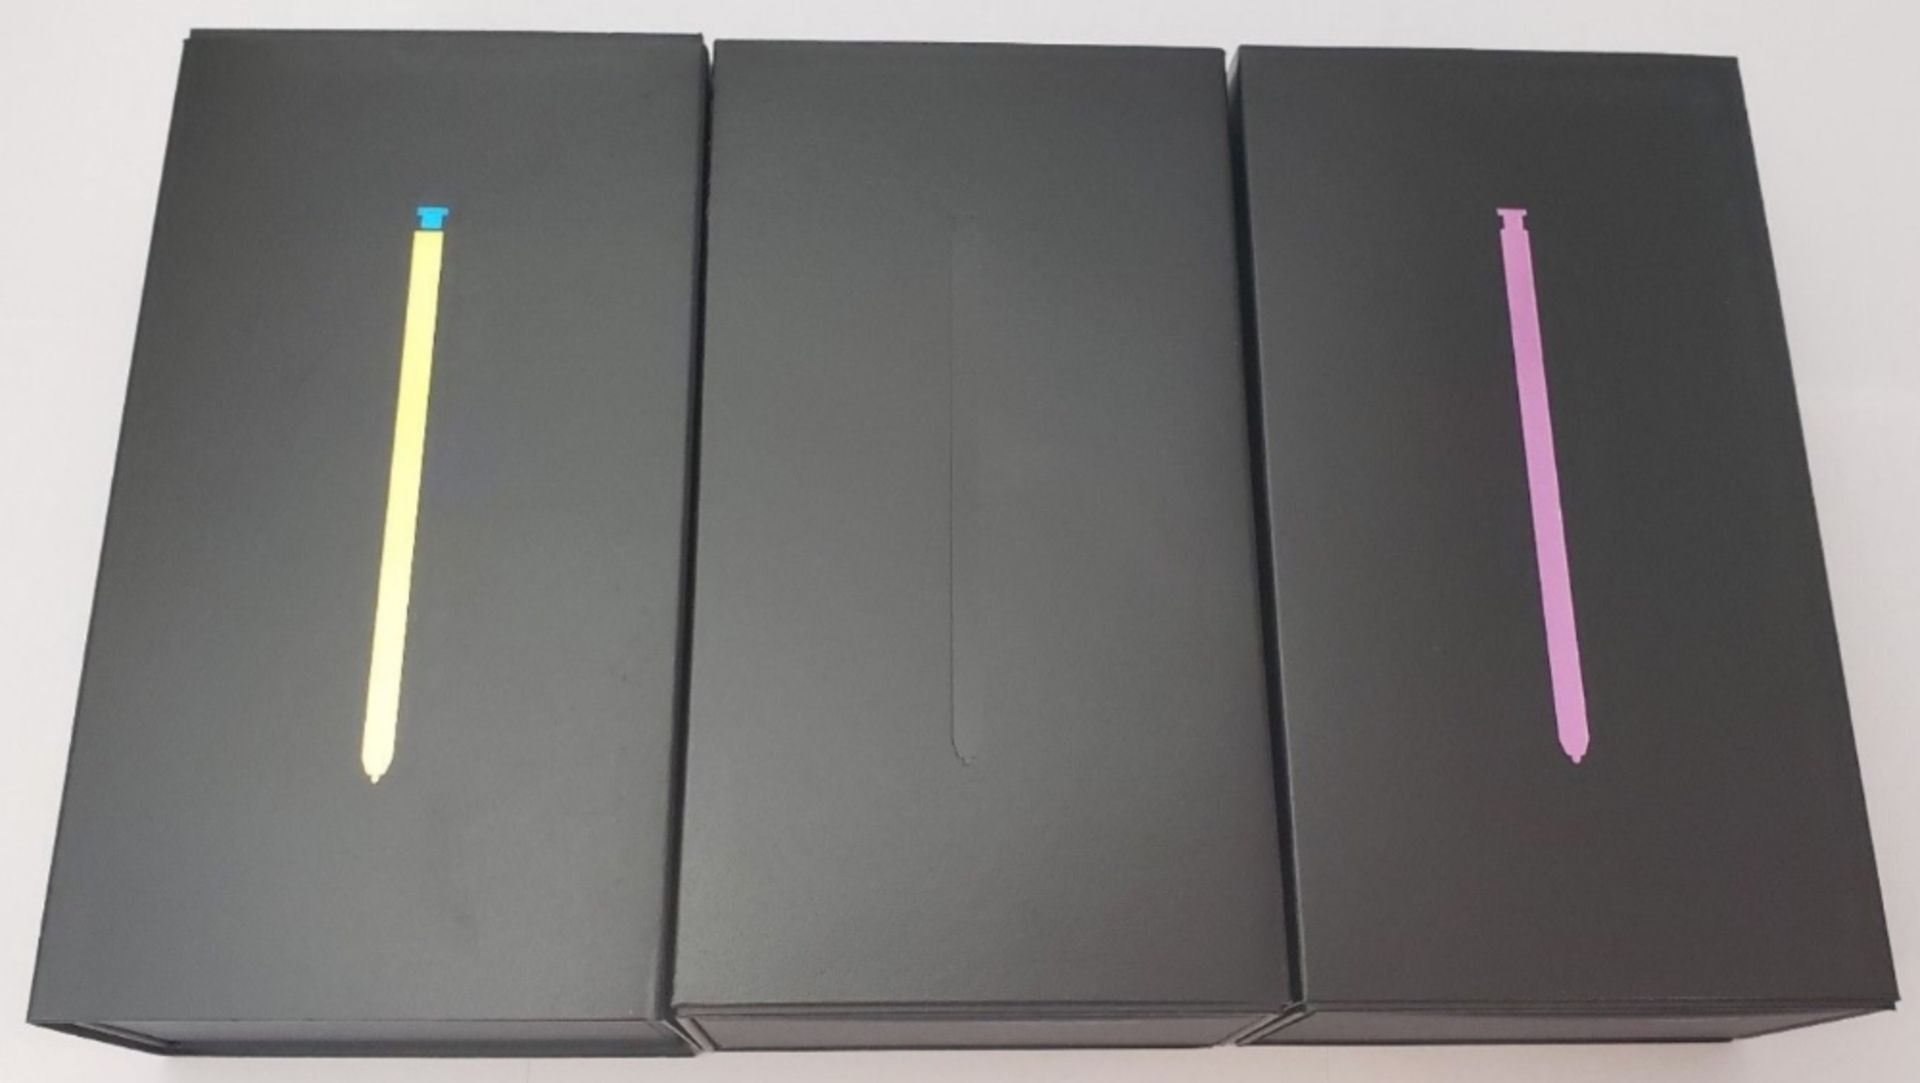 Bulk lot 100 x of Samsung Note 9 Boxes